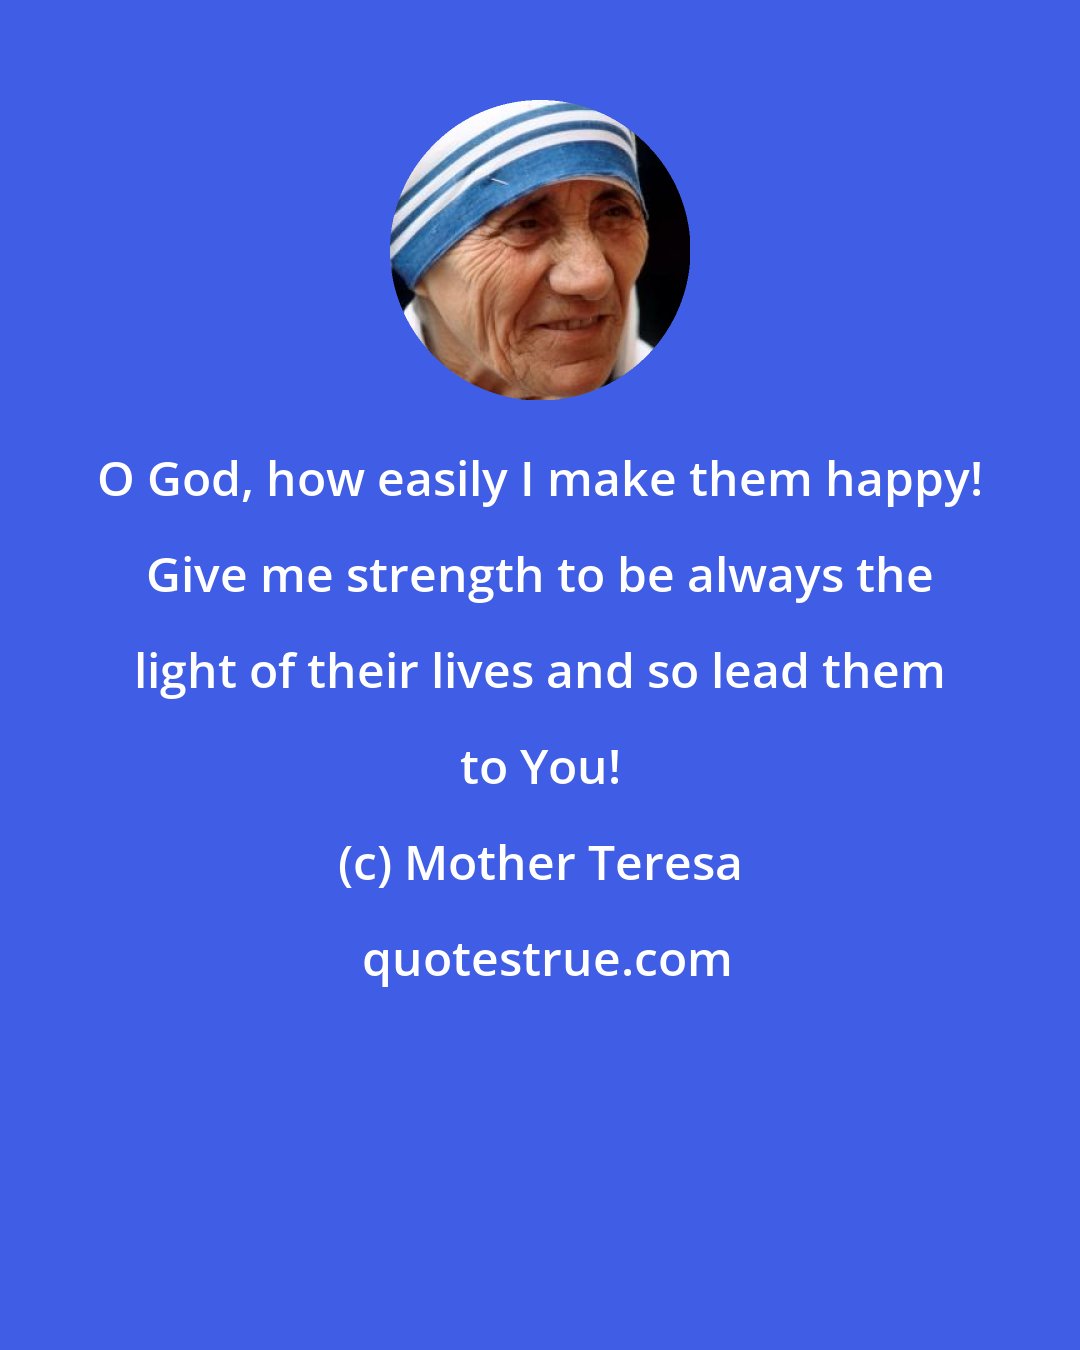 Mother Teresa: O God, how easily I make them happy! Give me strength to be always the light of their lives and so lead them to You!